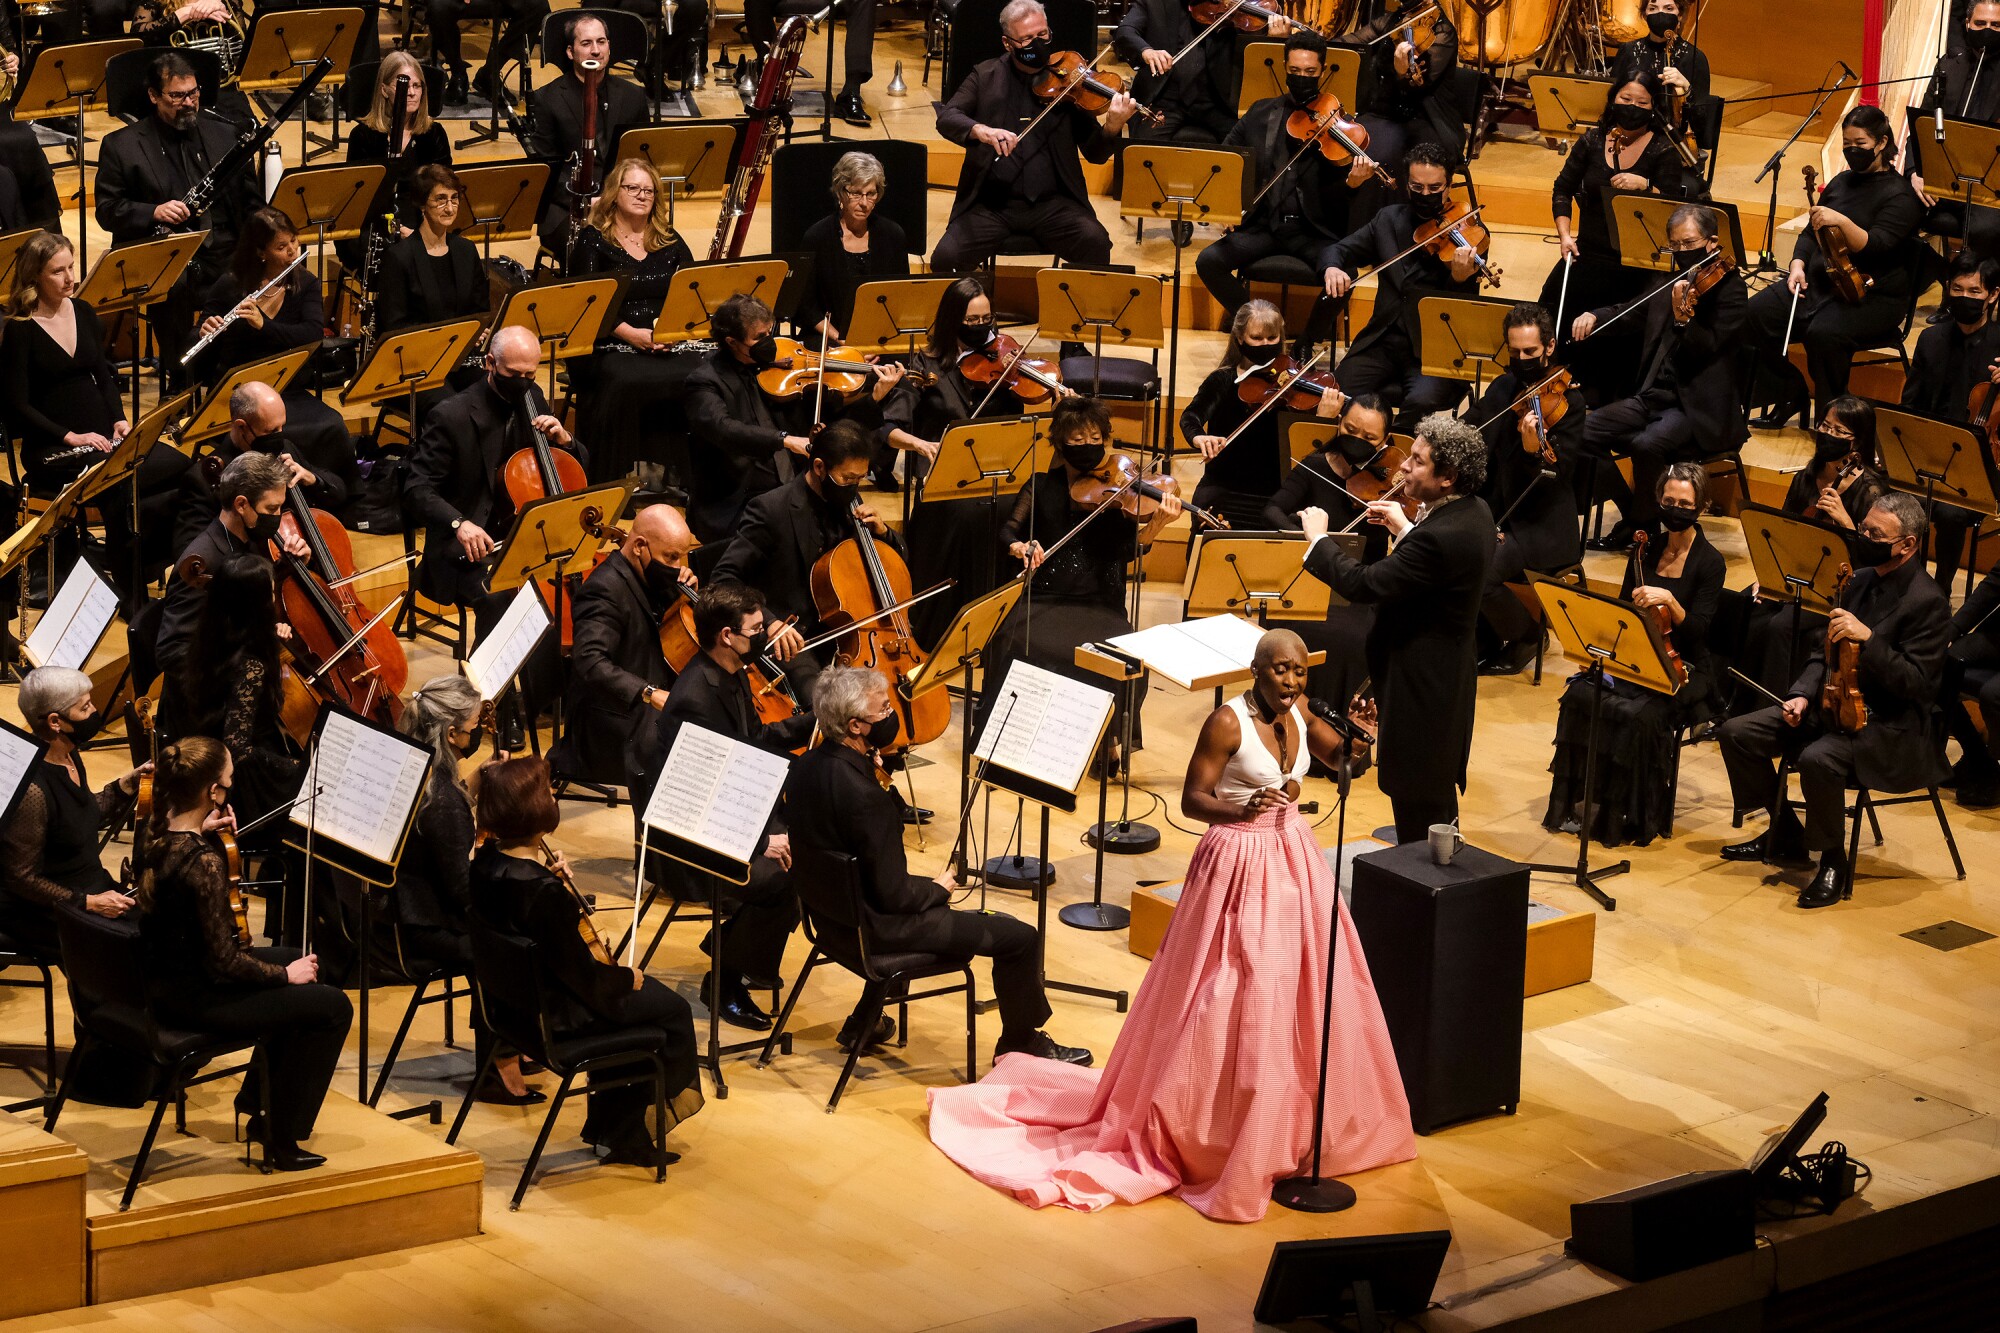 Singer Cynthia Erivo and conductor Gustavo Dudamel perform in the Los Angeles Philharmonic "Homecoming" gala concert.